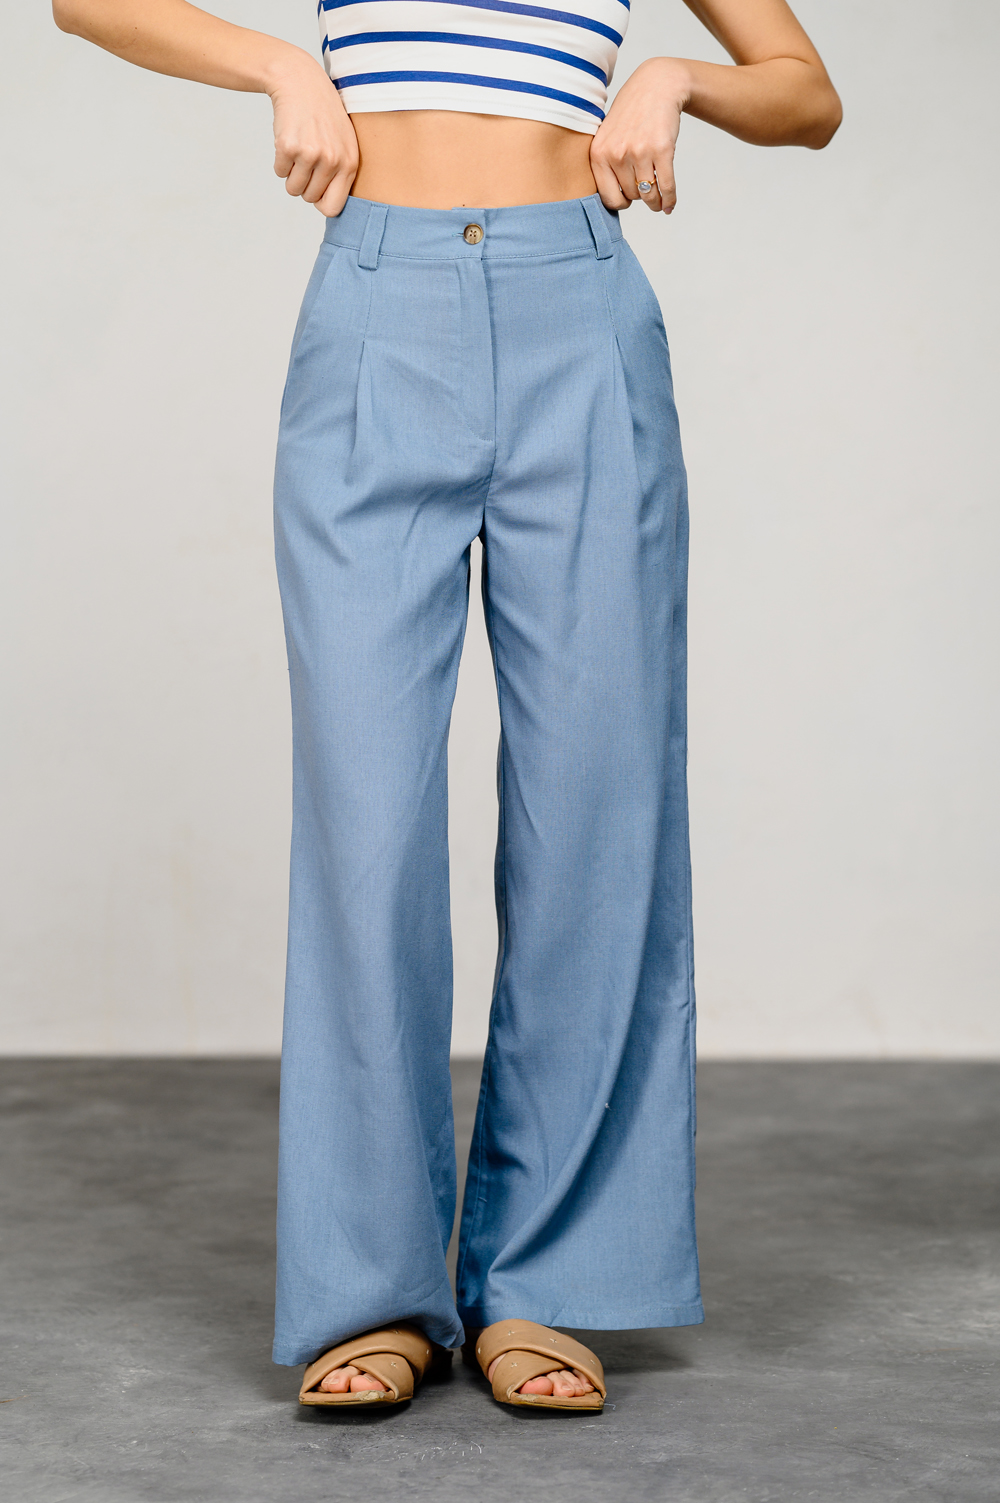 Gray and blue wide leg trousers